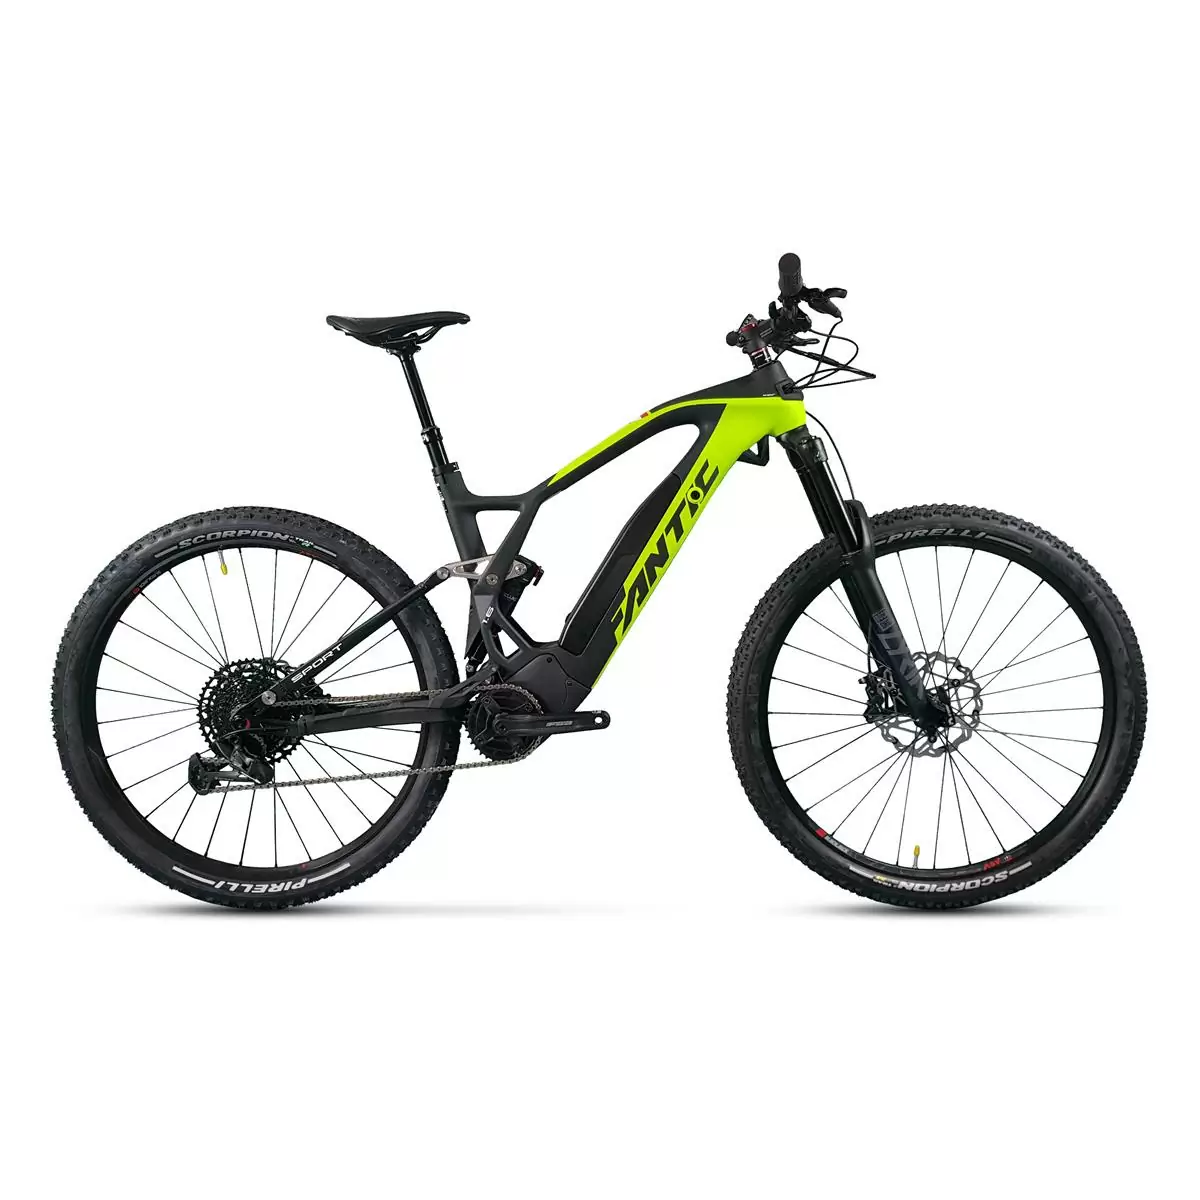 Integra XTF 1.6 Carbon Sport 29'' 160mm 12s 720wh Brose S-MAG Lima 2022 Talla S - image